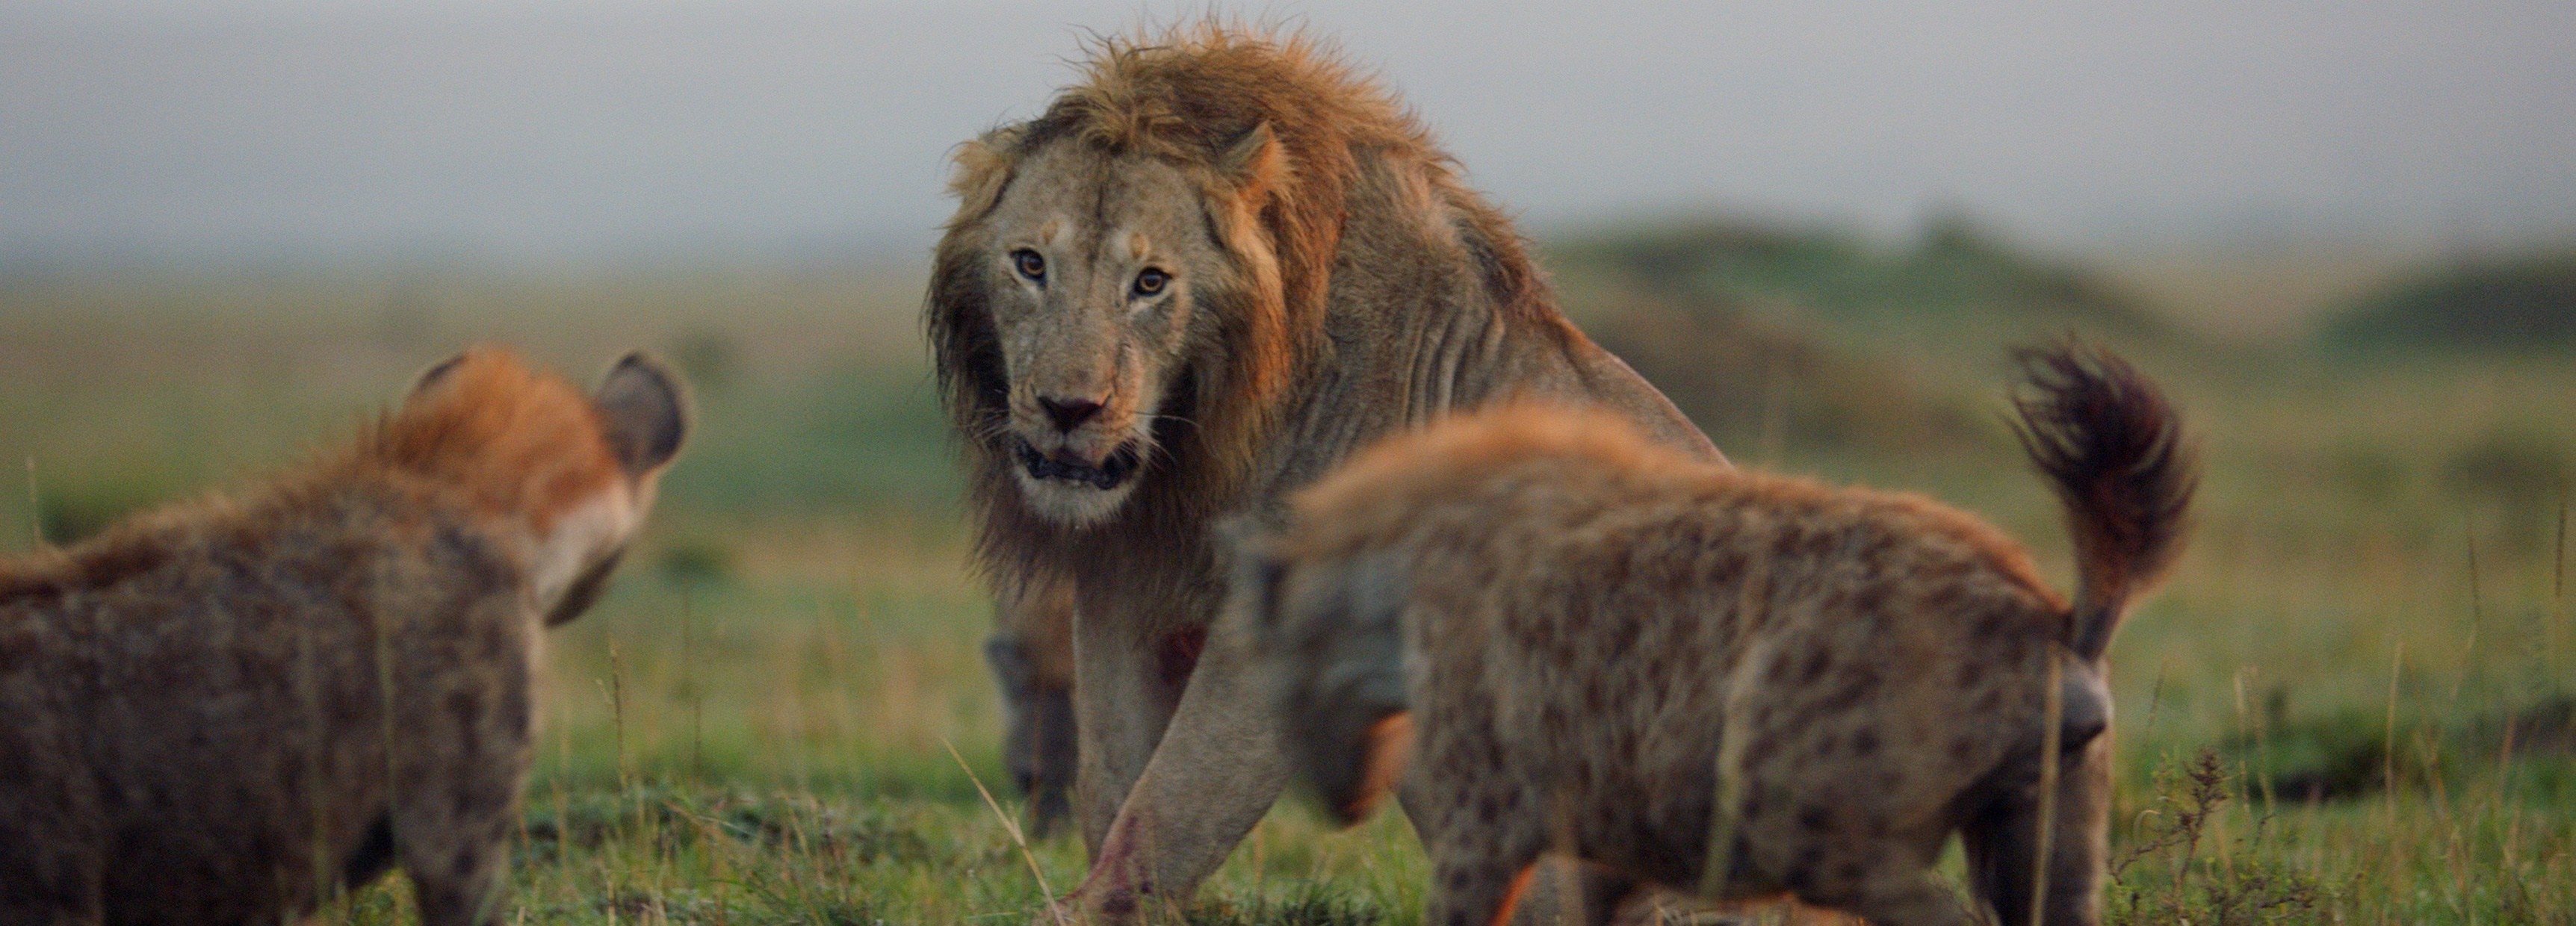 Lion attacked by pack of hyenas | BBC Earth